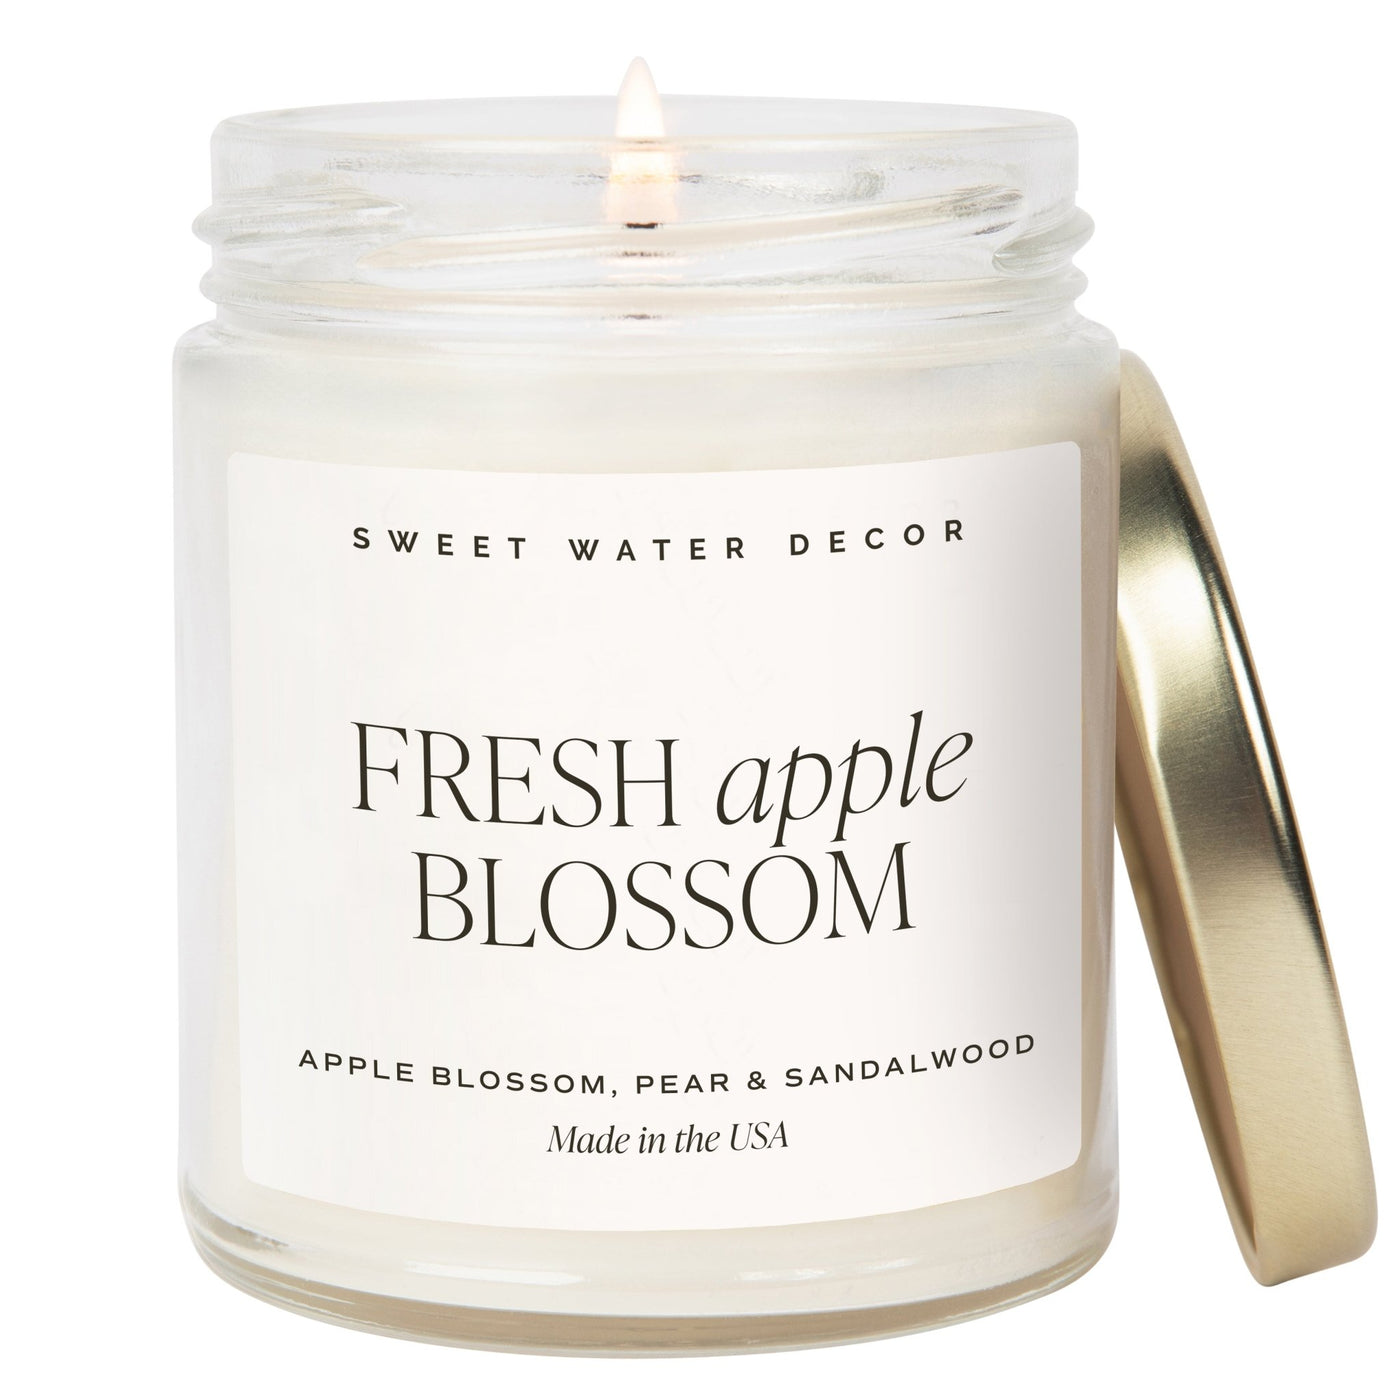 Fresh Apple Blossom Soy Candle - Clear Jar - 9 oz - Sweet Water Decor - Candles